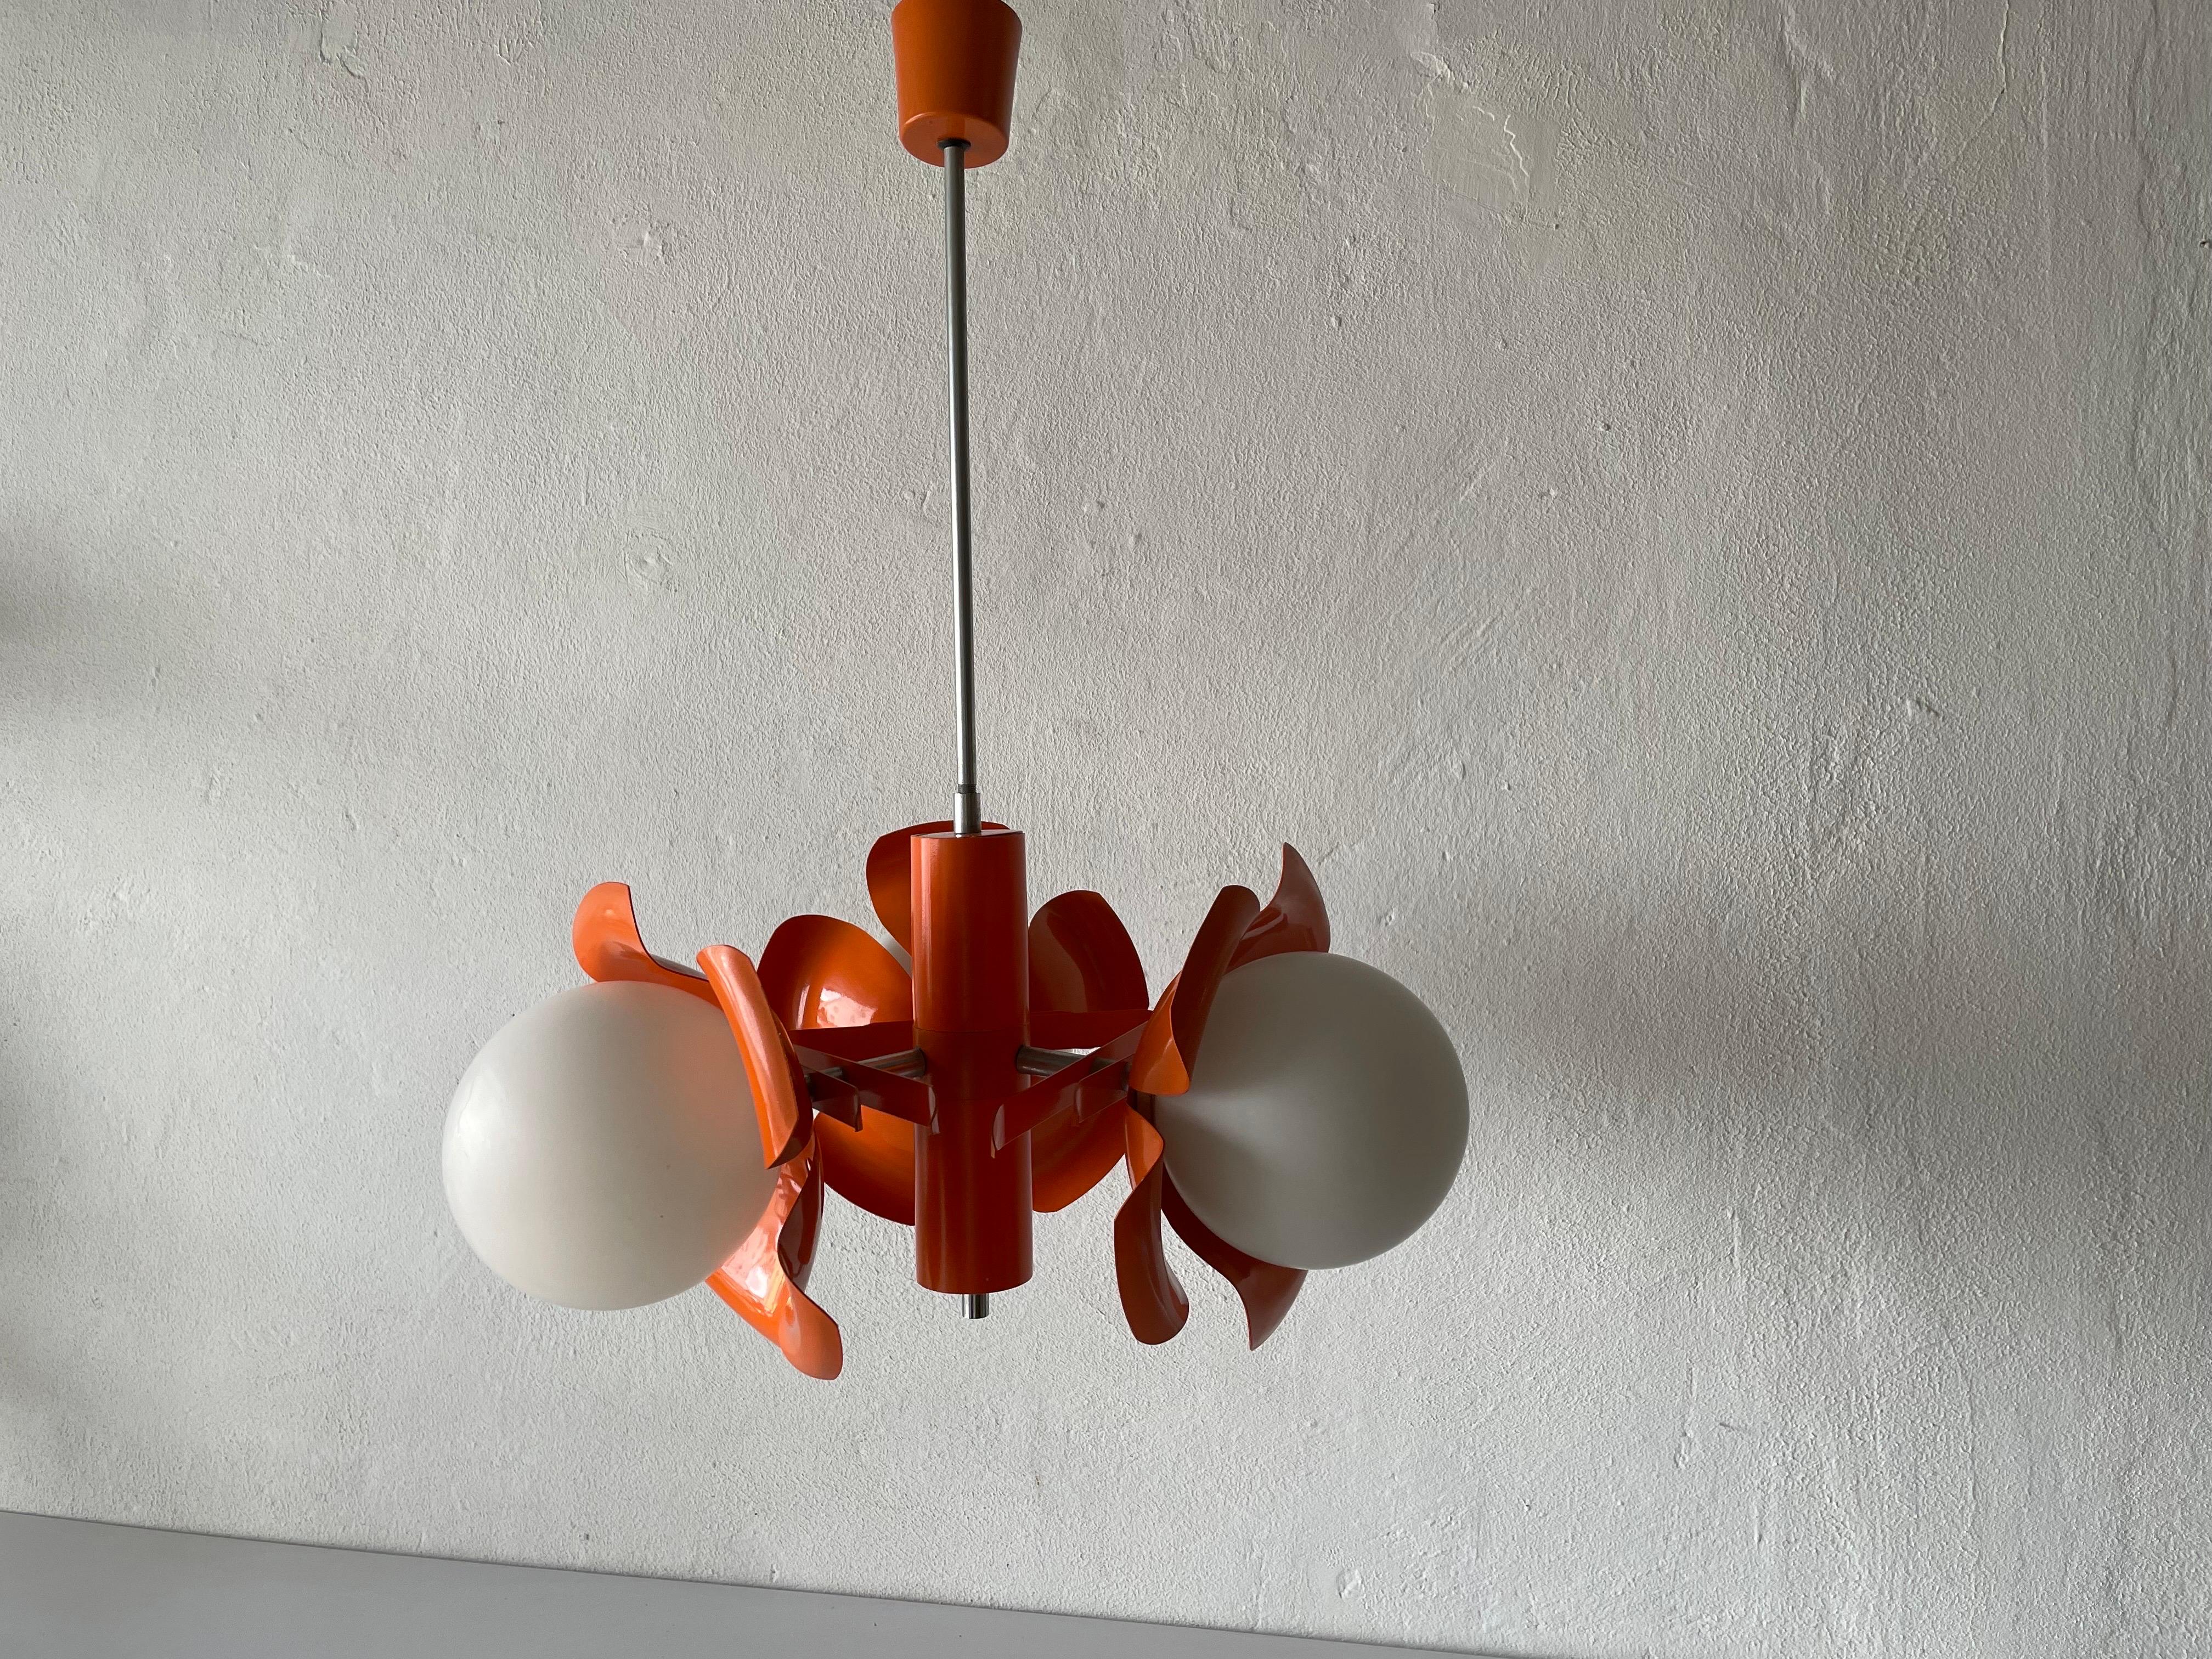 Metal Orange Flower Design Space Age Ceiling Lamp, 1970s, Italy For Sale